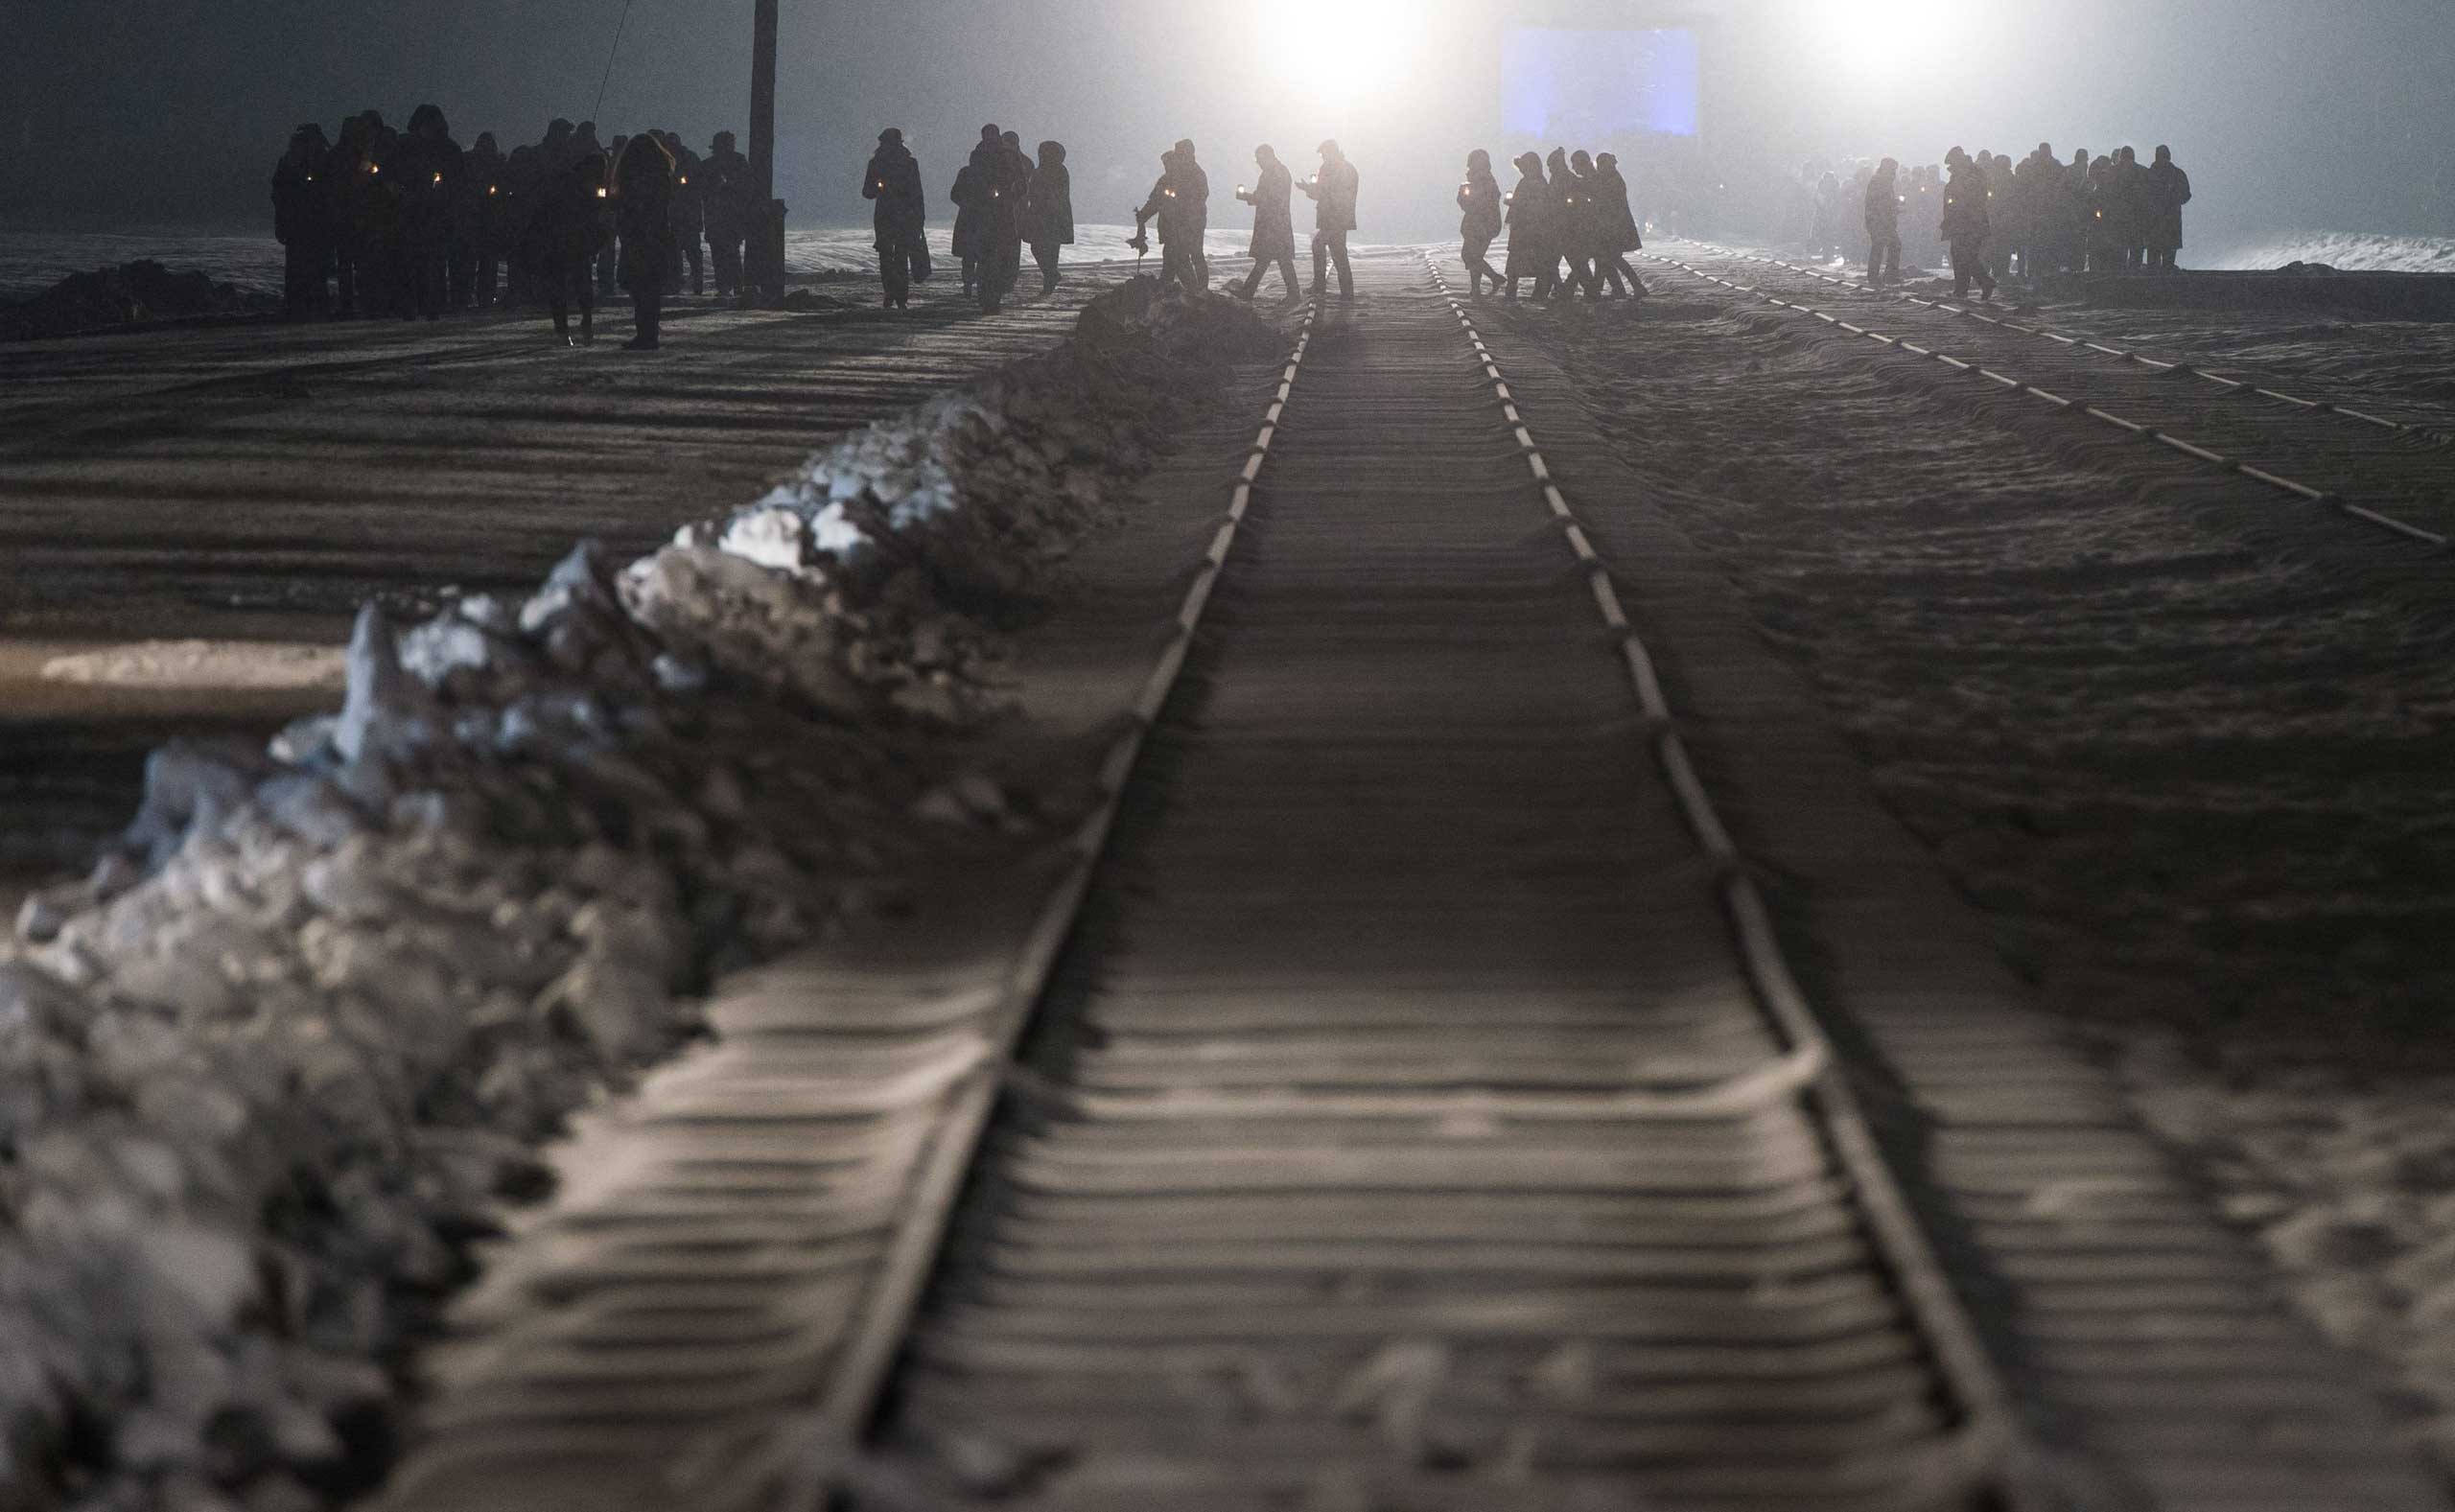 Auschwitz survivors and families visit the Birkenau Memorial carrying candles on Jan. 27, 2015 in Oswiecim, Poland. (Ian Gavan—Getty Images)